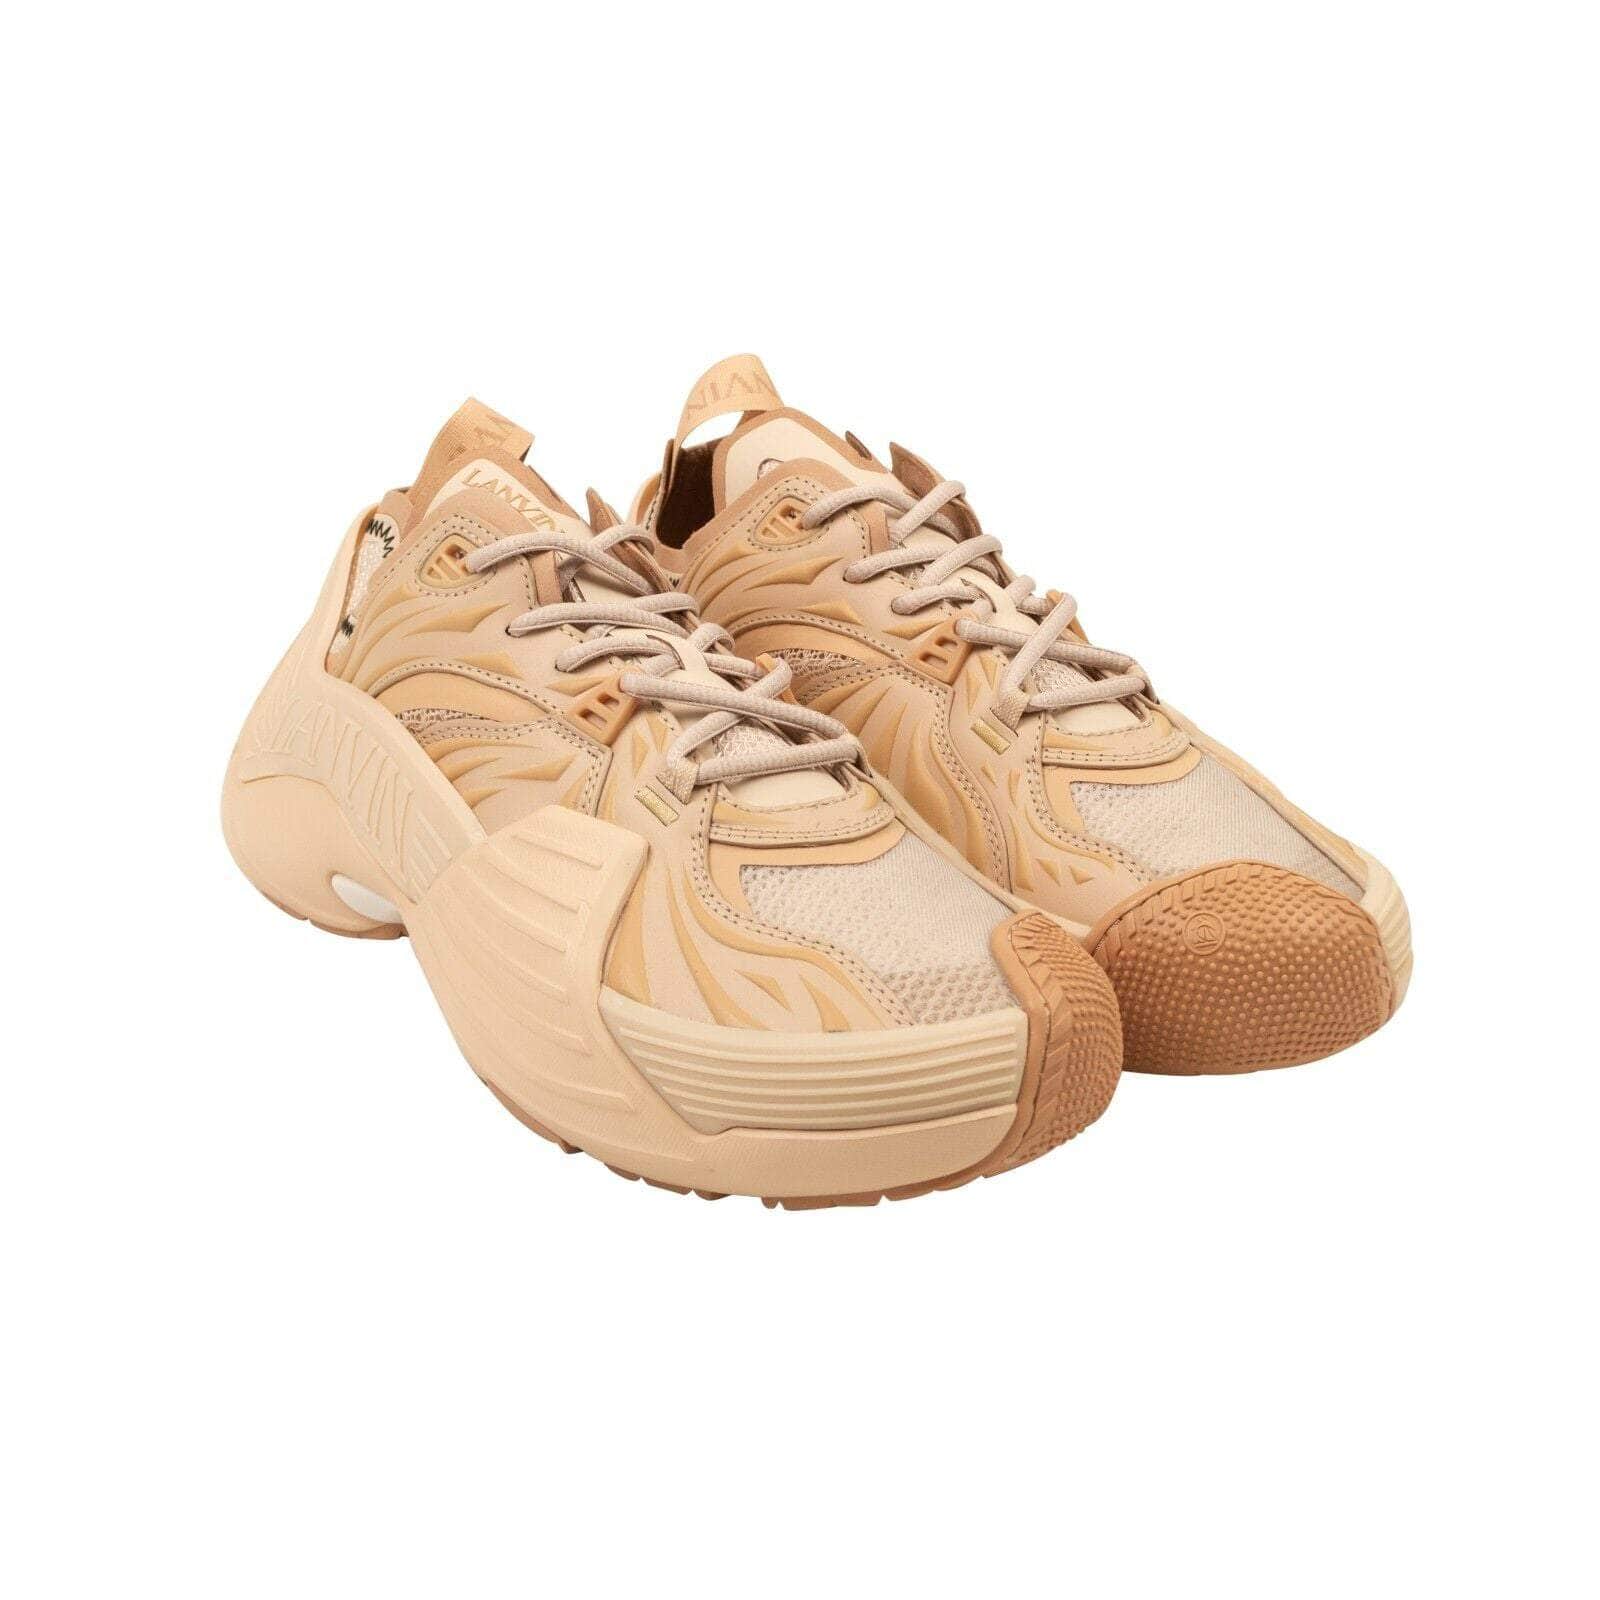 Lanvin 500-750, channelenable-all, chicmi, couponcollection, gender-mens, main-shoes, mens-shoes, size-41 Nude Flash X Low Top Athletic Sneakers